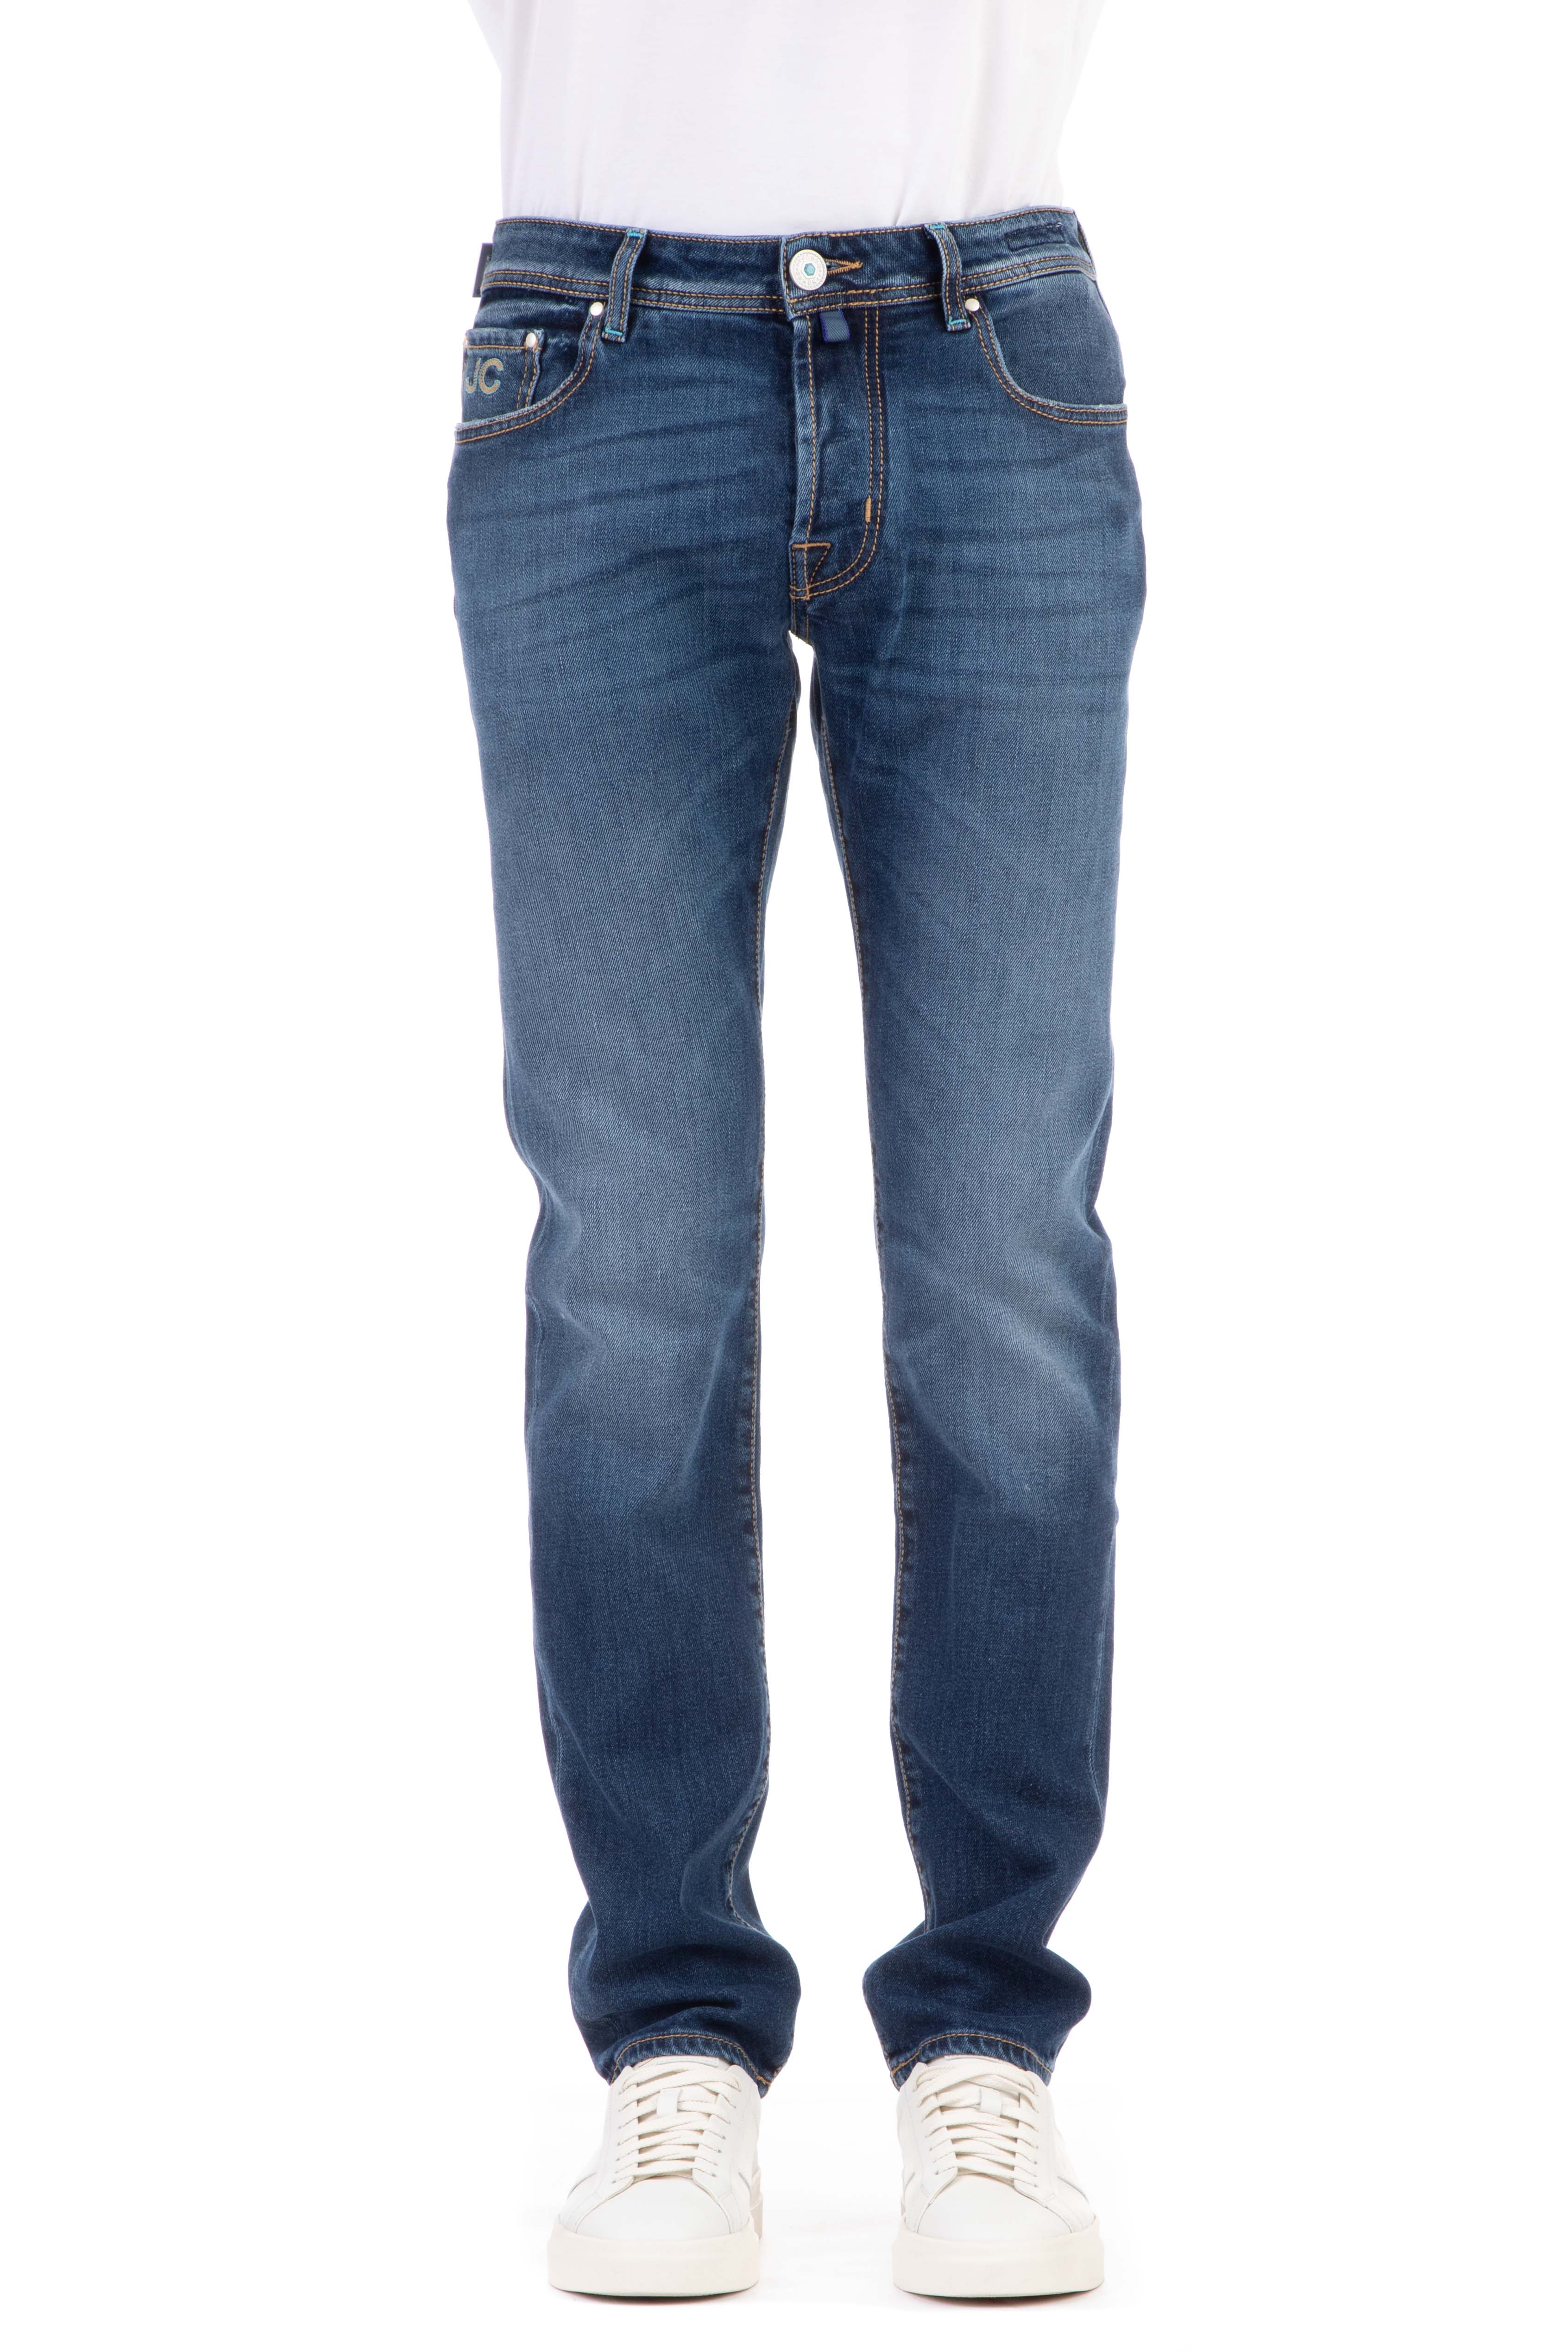 Cotton-lyocell jeans with special bard fit label